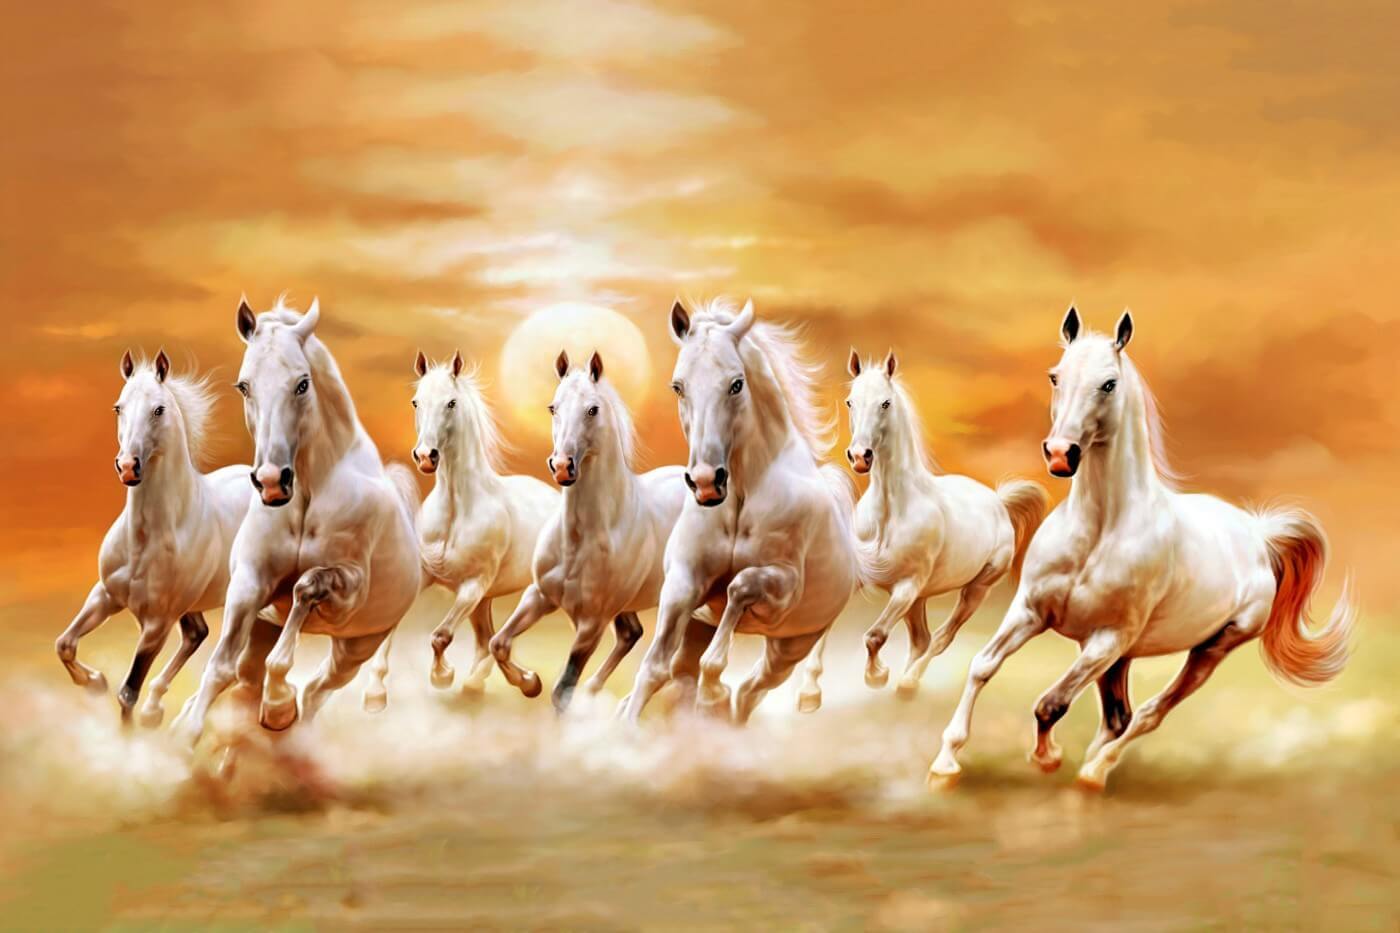 Seven Magnificent White Horses Running - Framed Prints by Joan ...